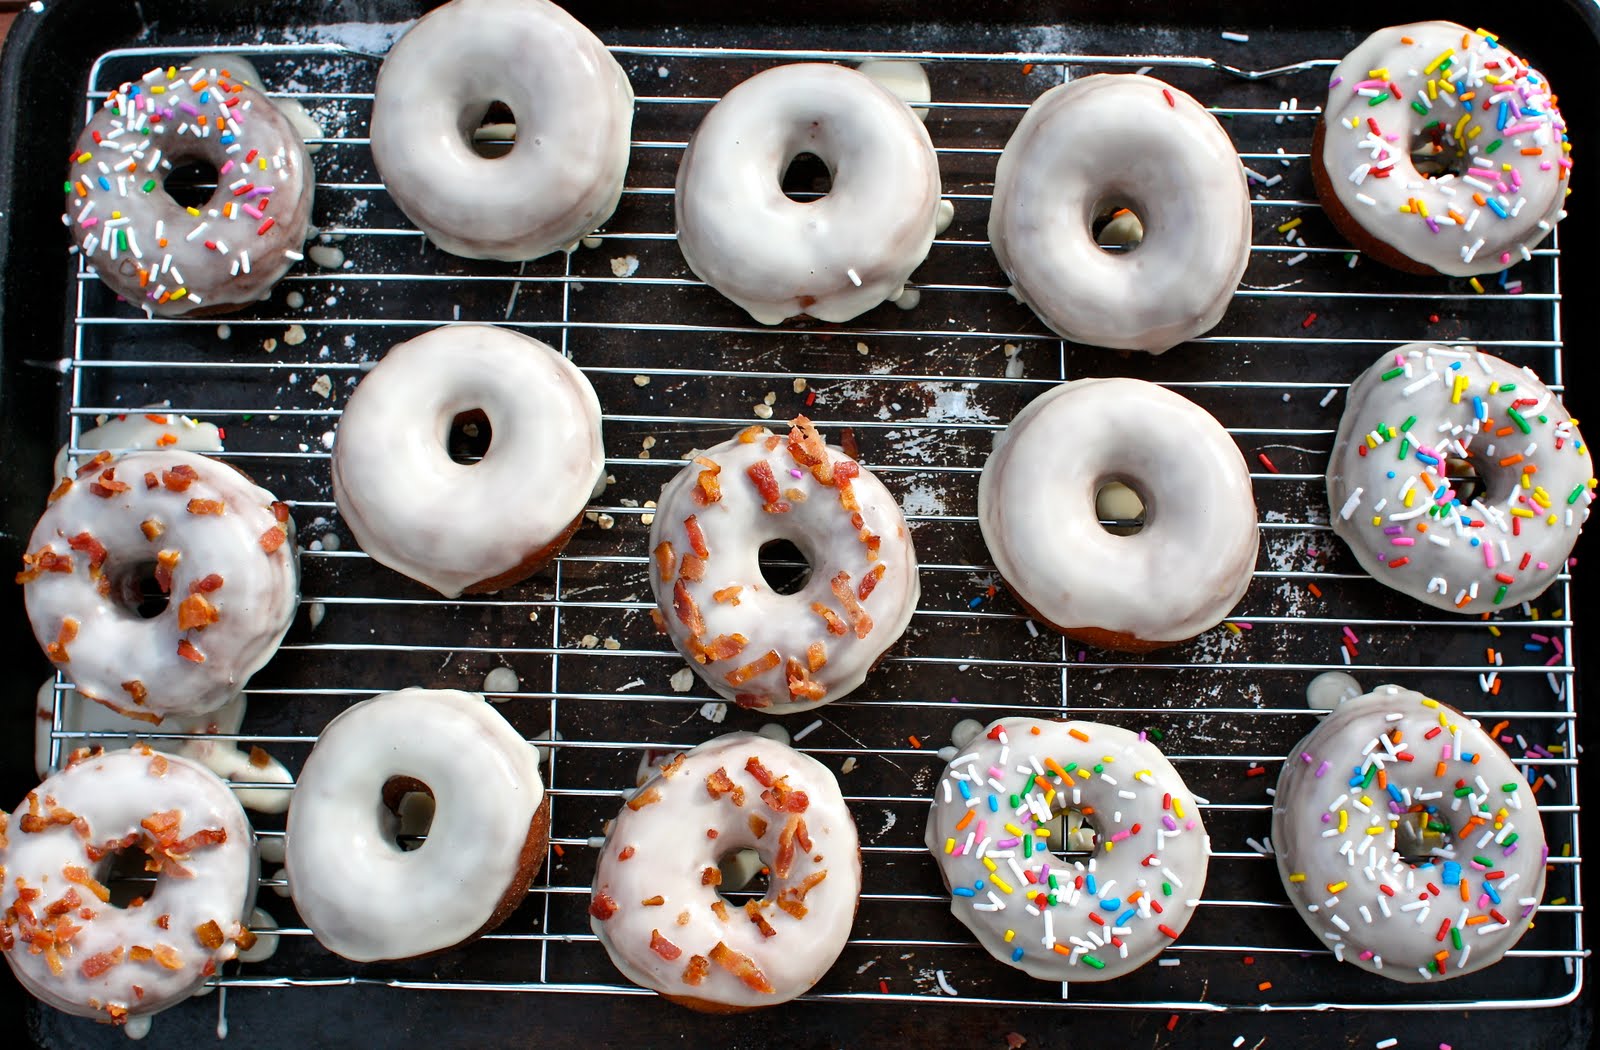 Variations on Yeast Doughnuts